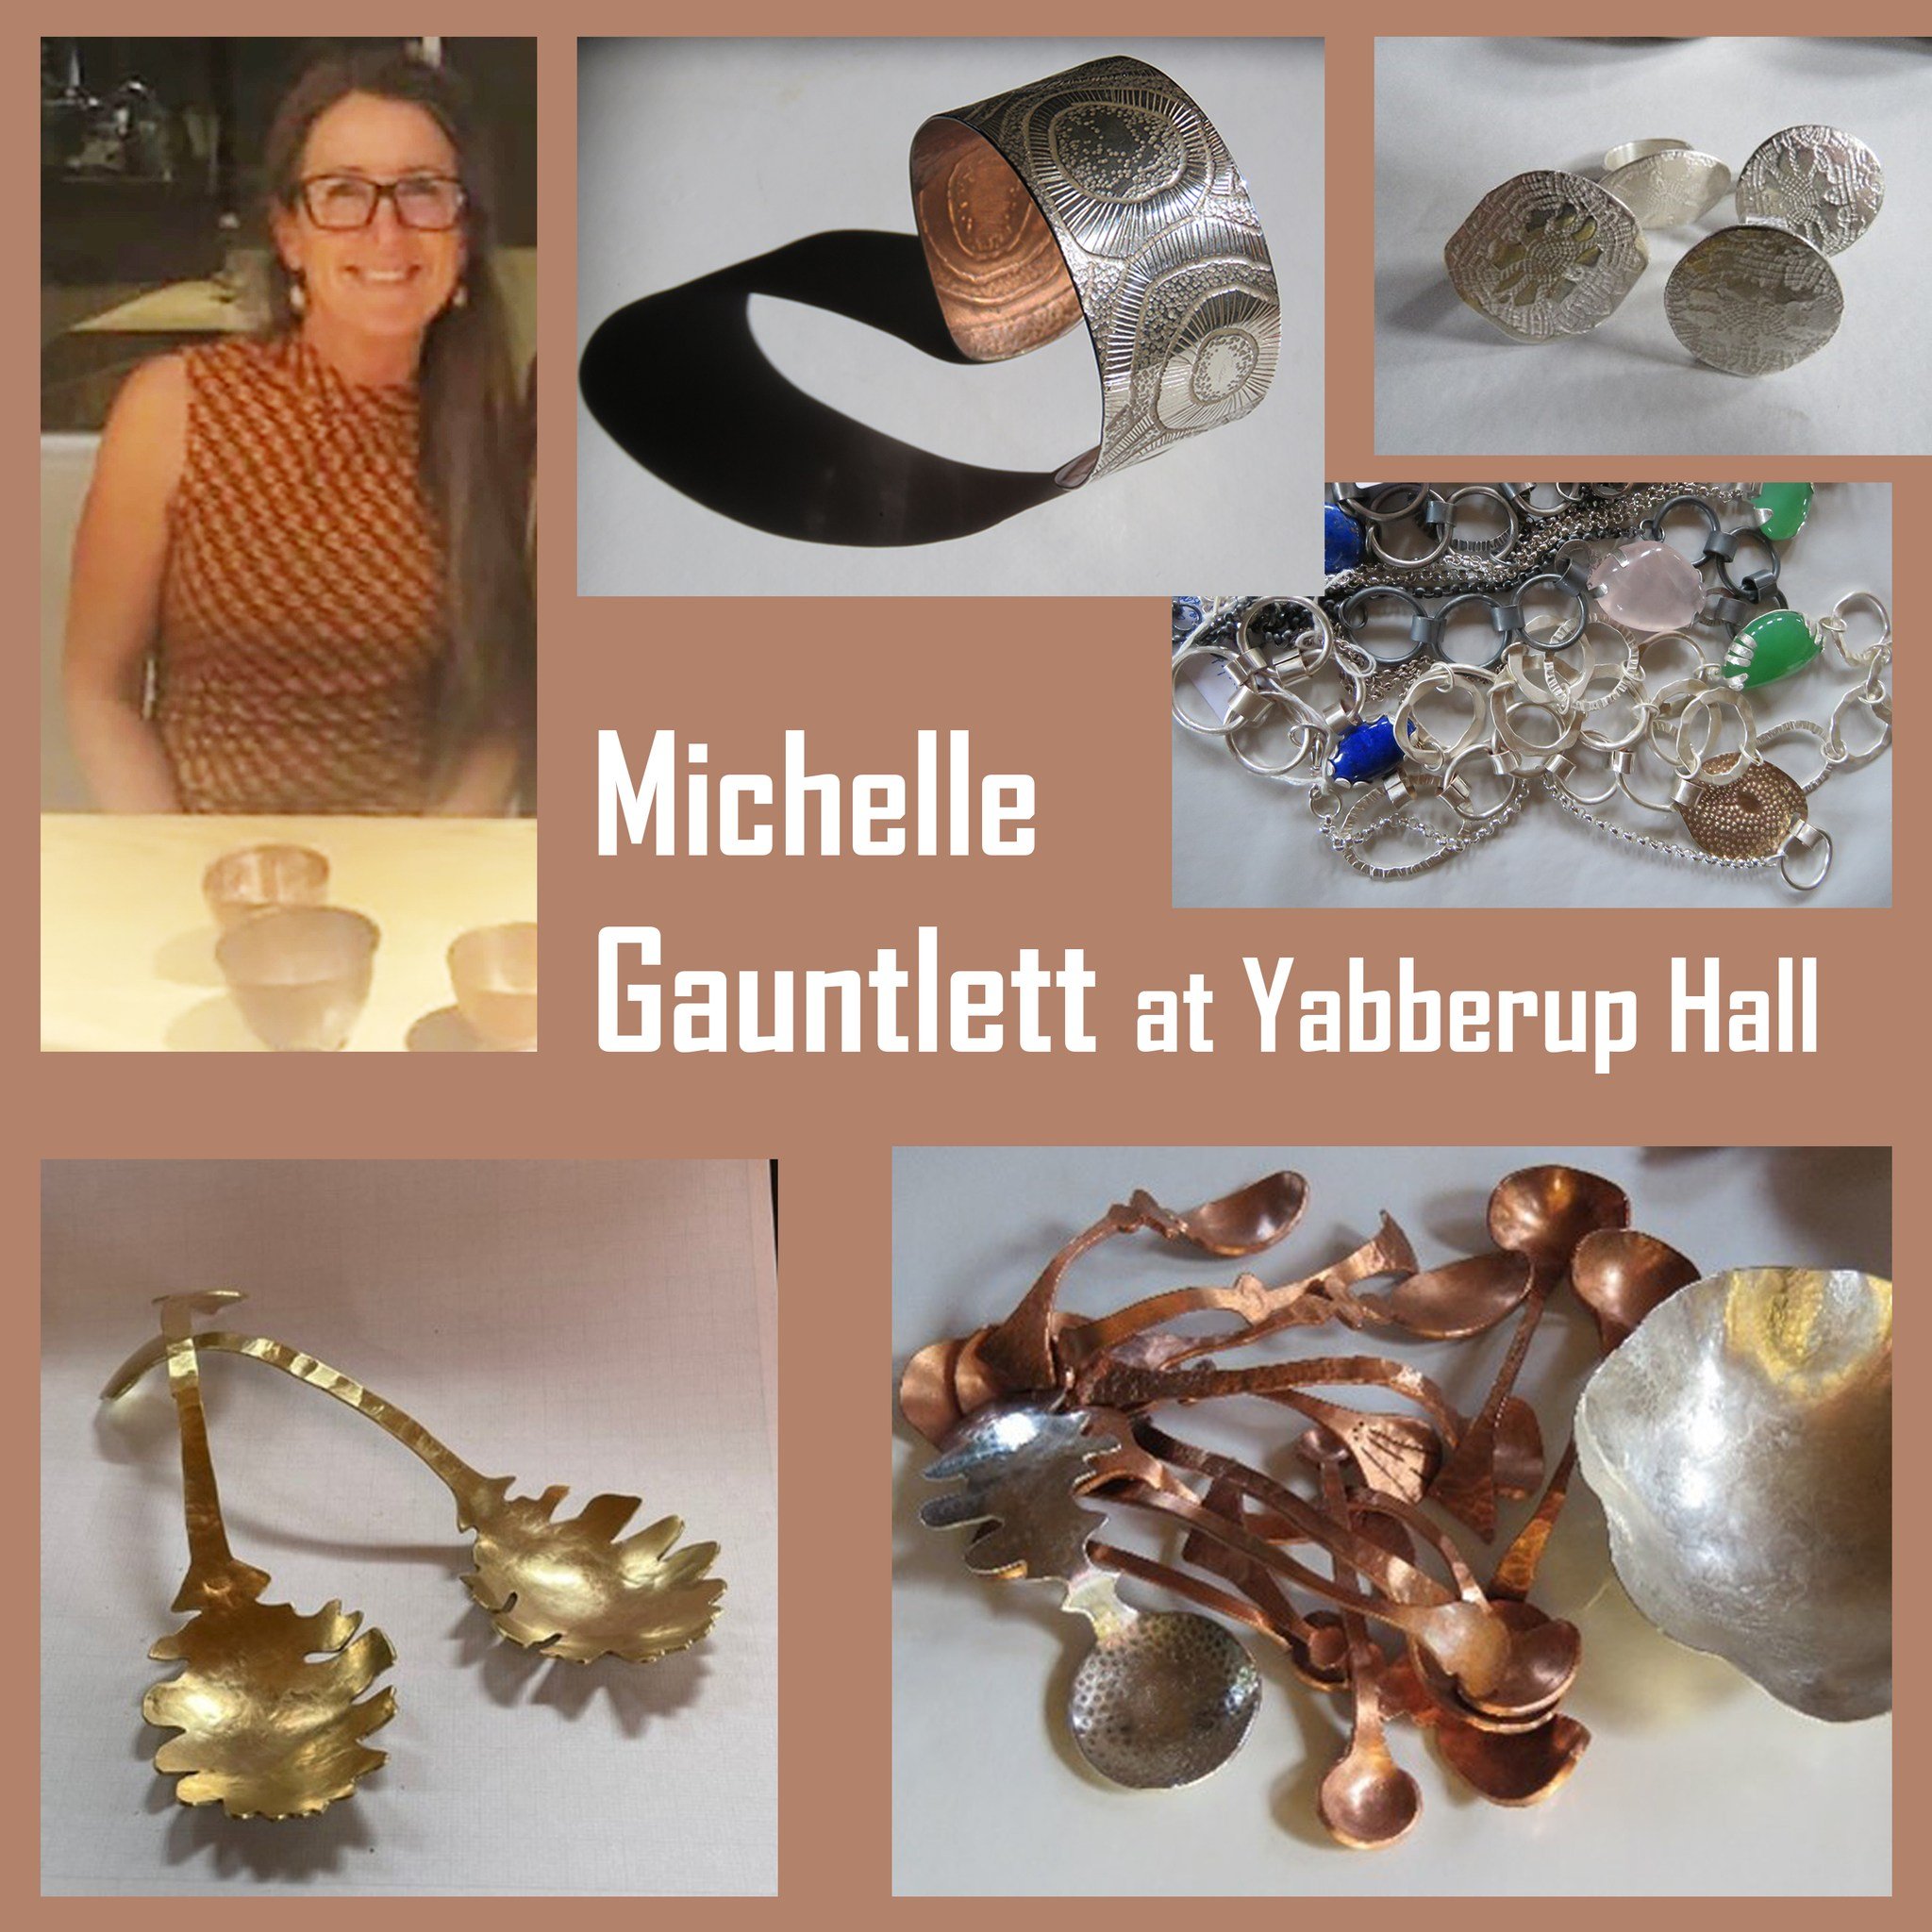 Silversmith MICHELLE GAUNTLETT  will have her stunning hand made rings, bangles chains, serving and condiment spoons in silver and copper at YABBERUP HALL during THE PRESTON VALLEY ARTISAN TRAIL on 4 &amp; 5 November.
Michelle  be joined by silversmi